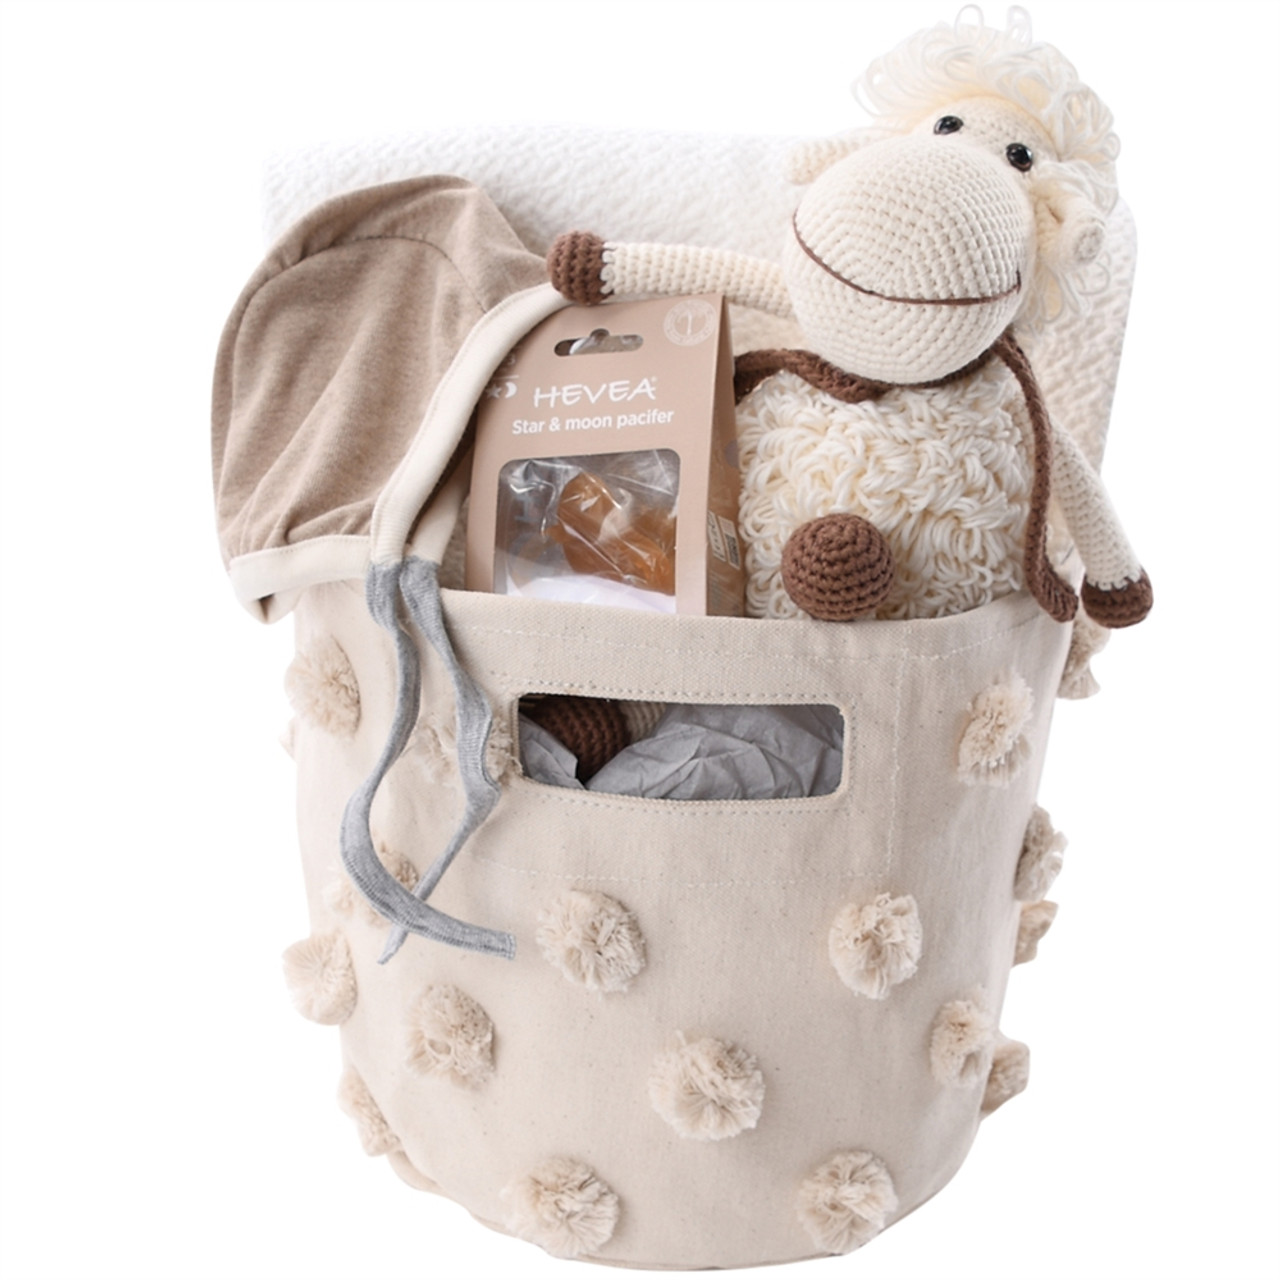 Baby Shower Gift Baskets - Counting Sheep